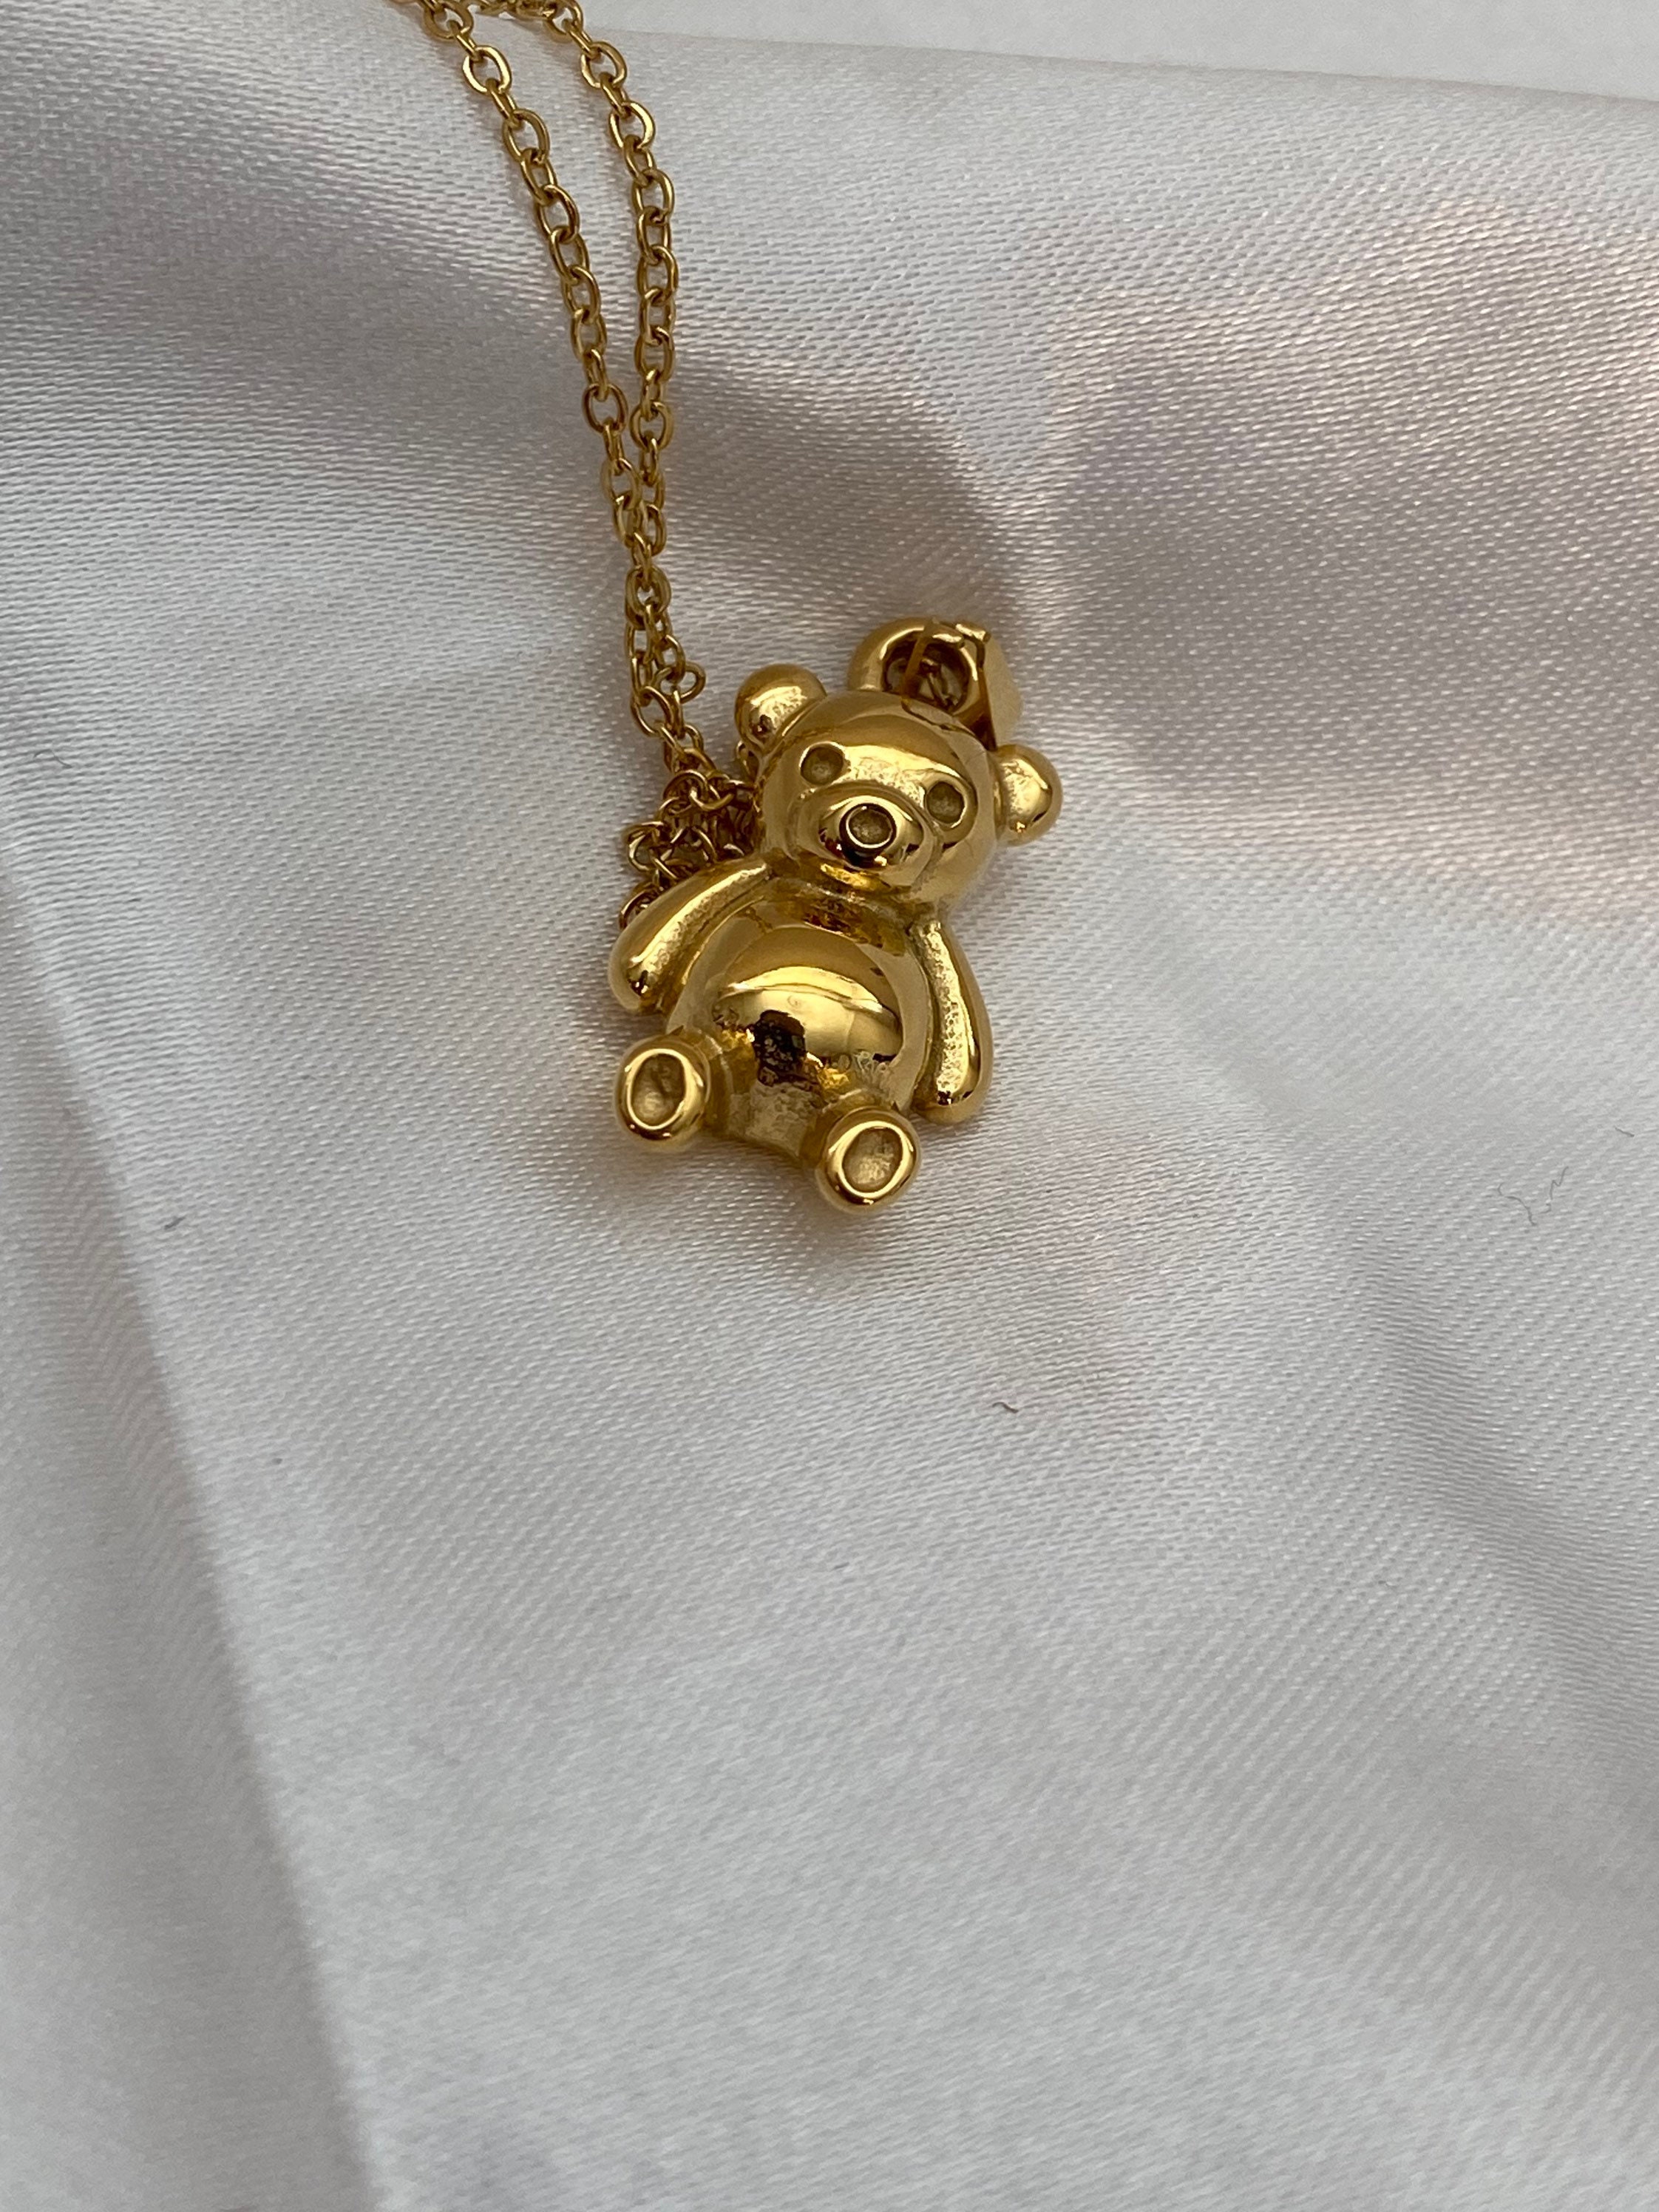 Buy 14K Gold Teddy Bear Necklace New Born Gift Best Friend Gift Tiny Bear  Necklace, Kid's Jewelry Online in India - Etsy